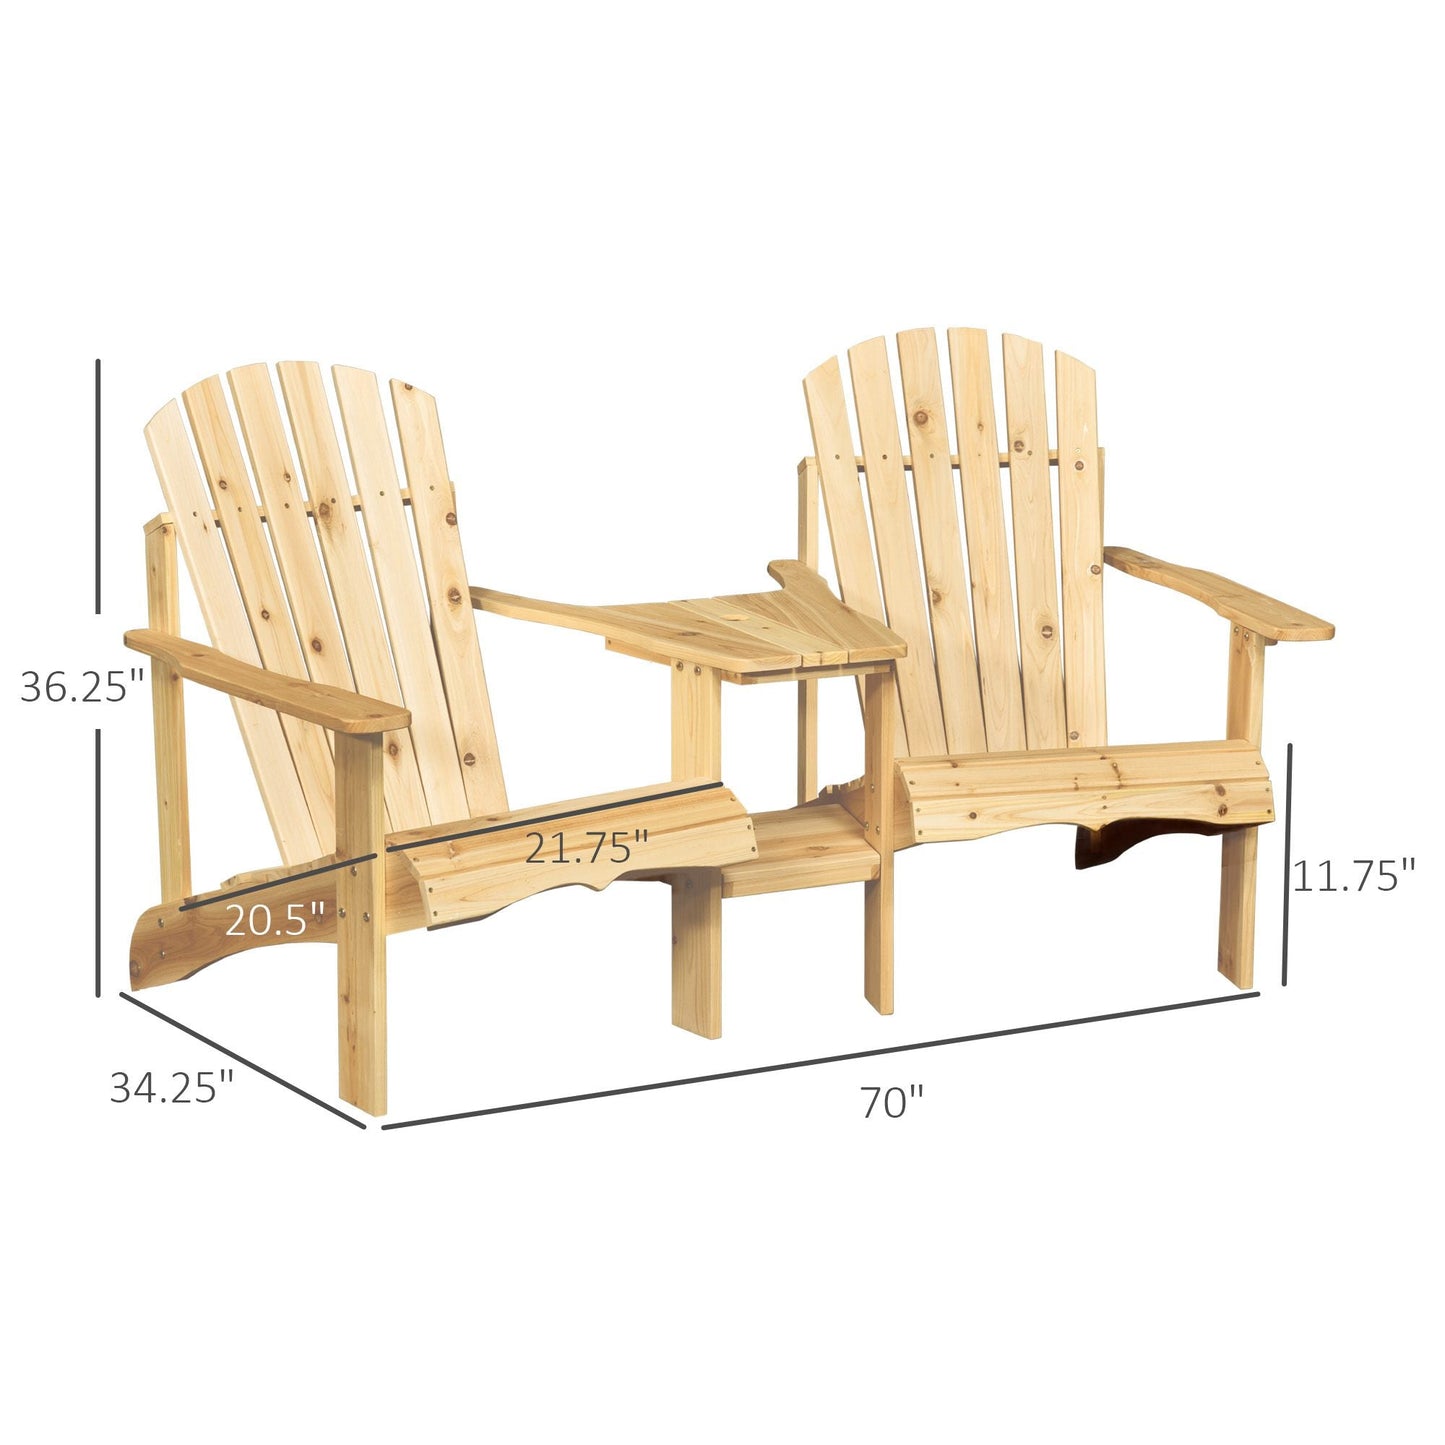 Outdoor and Garden-Set of 2 Wooden Adirondack Chairs, Outdoor Double Seat with Center Table and Umbrella Hole for Patio, Backyard, Deck, Fire Pit, Natural - Outdoor Style Company